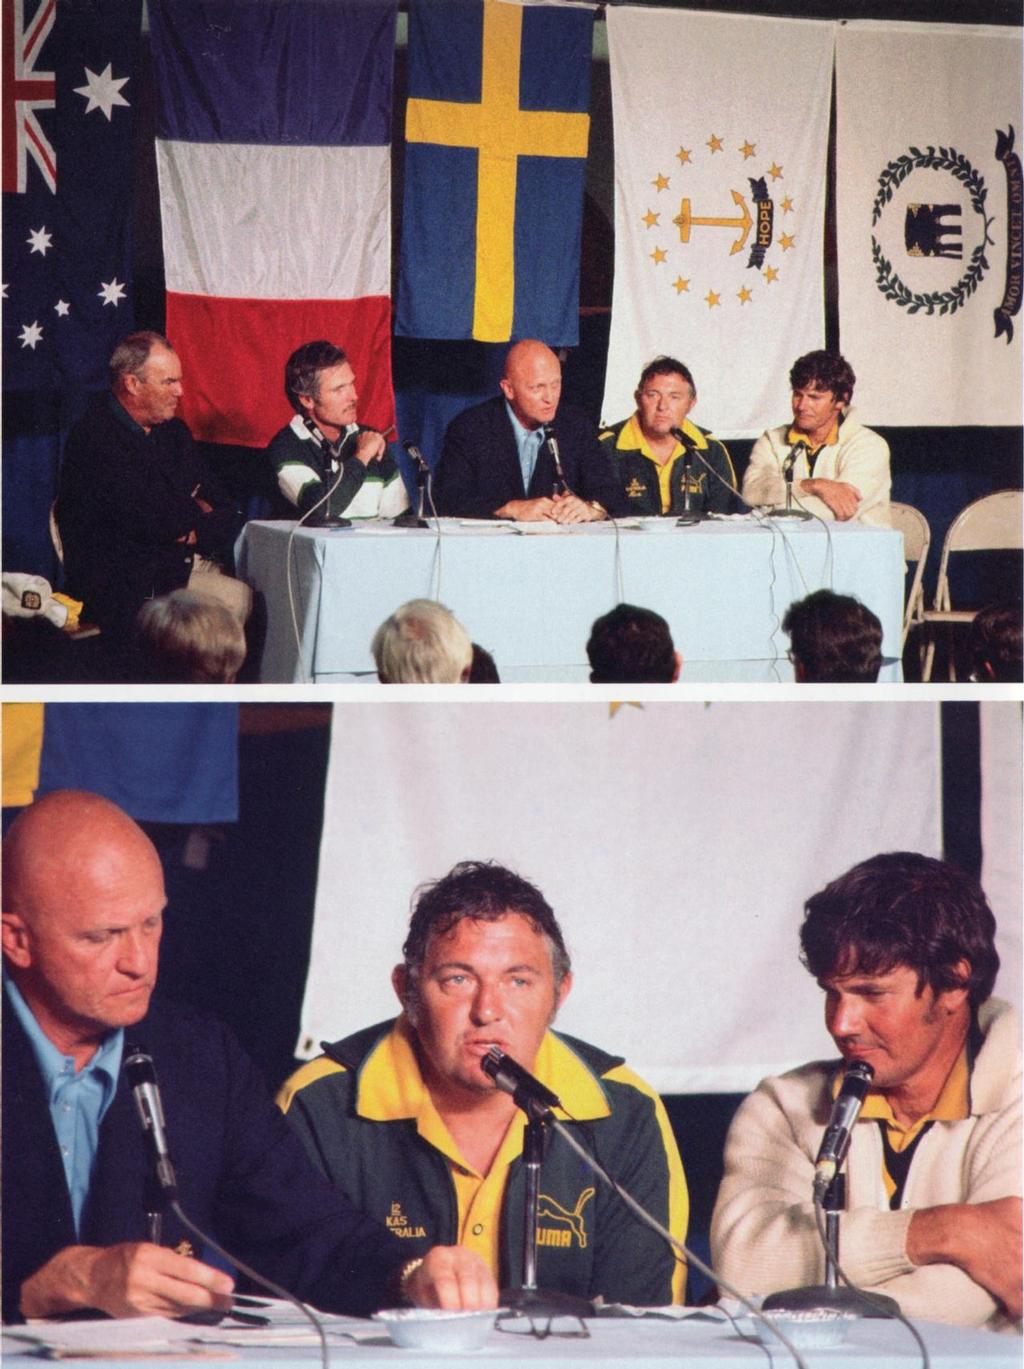 Bill Ficker moderating the 1977 America’s Cup press conference between the crews of Courageous and Australia © Paul Darling Photography Maritime Productions www.sail-world.com/nz